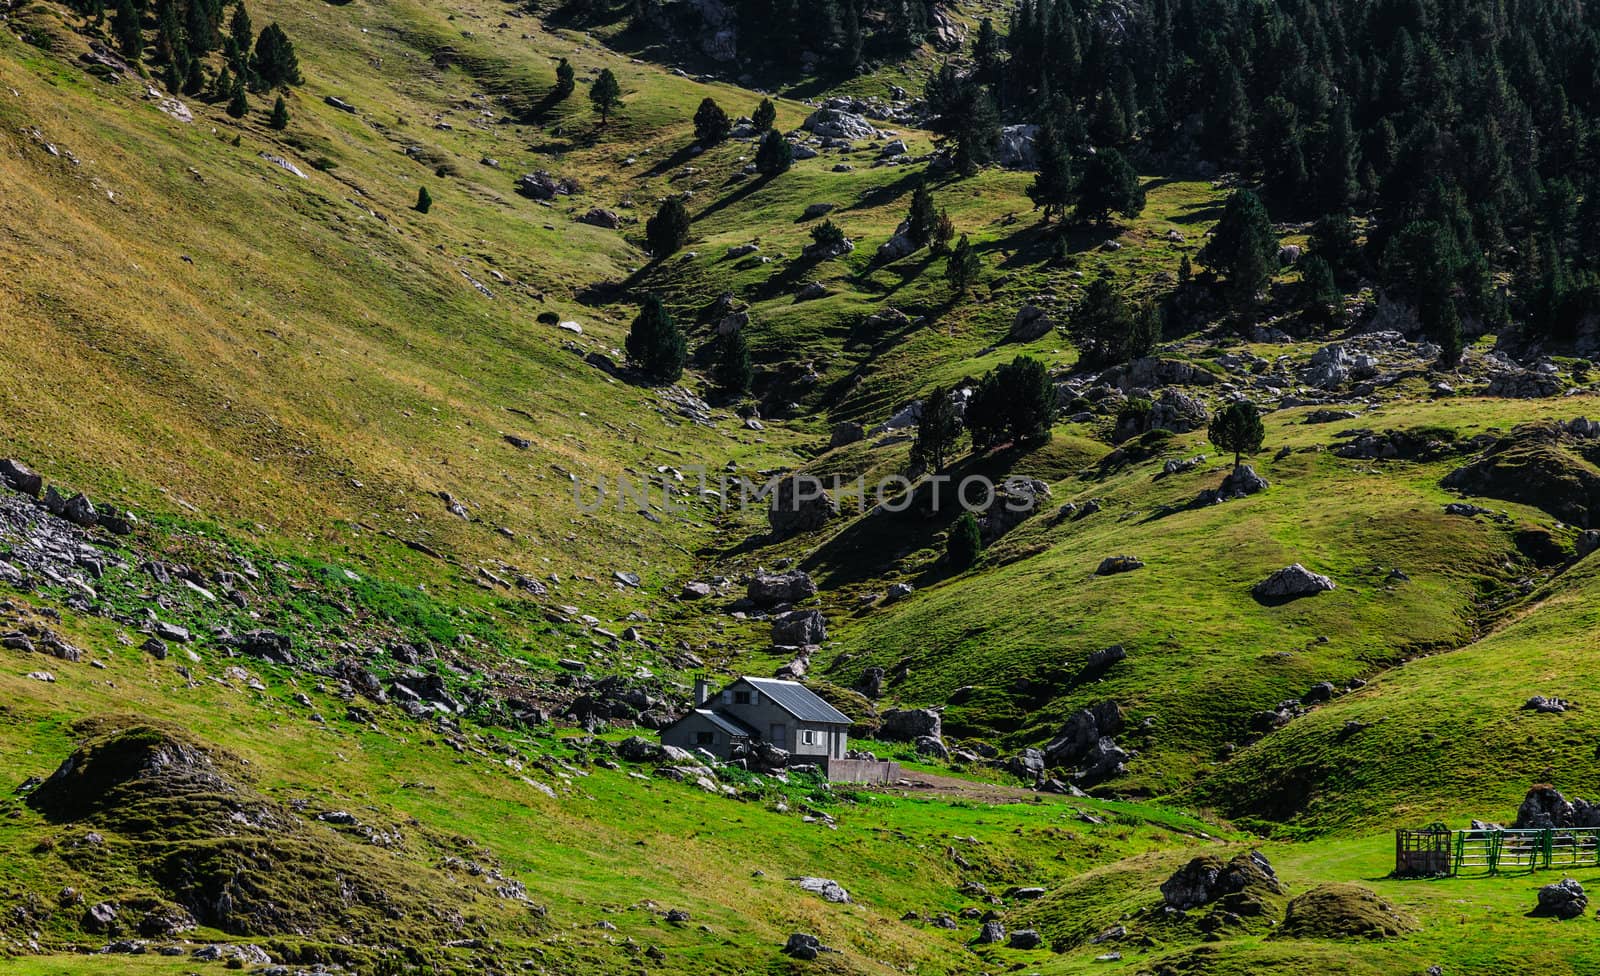 Image of a shelter located in a mountainous valley (Ossau Valley) in Pyrenees Mountains, France.